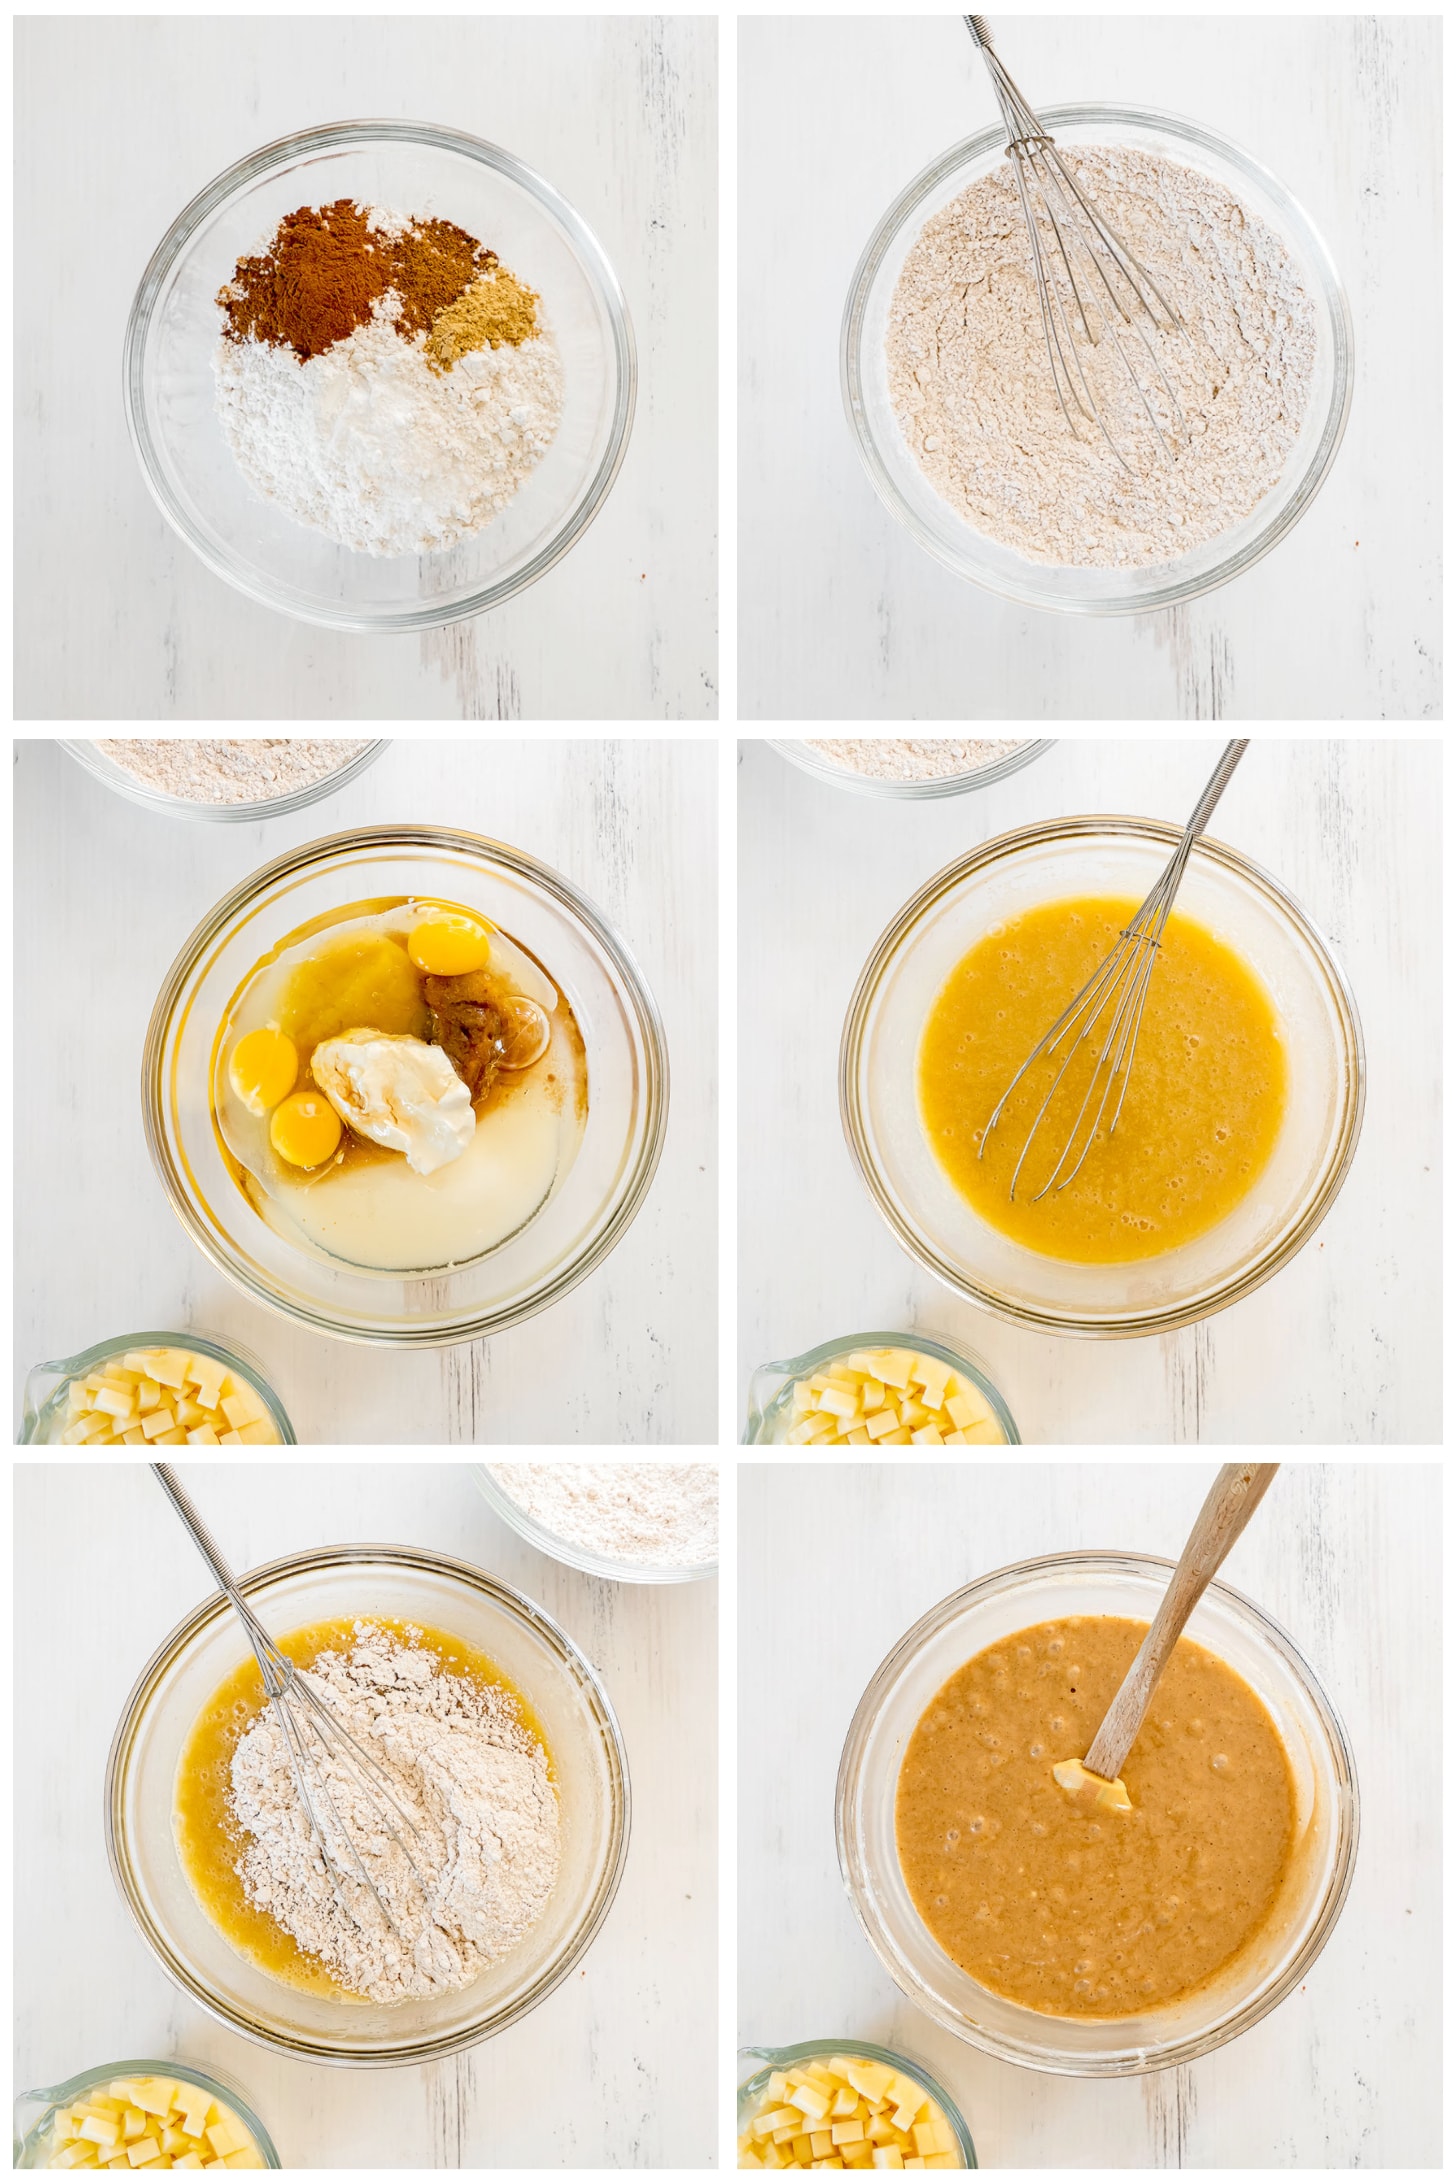 photo collage demonstrating how to make apple spice cake batter in a mixing bowl